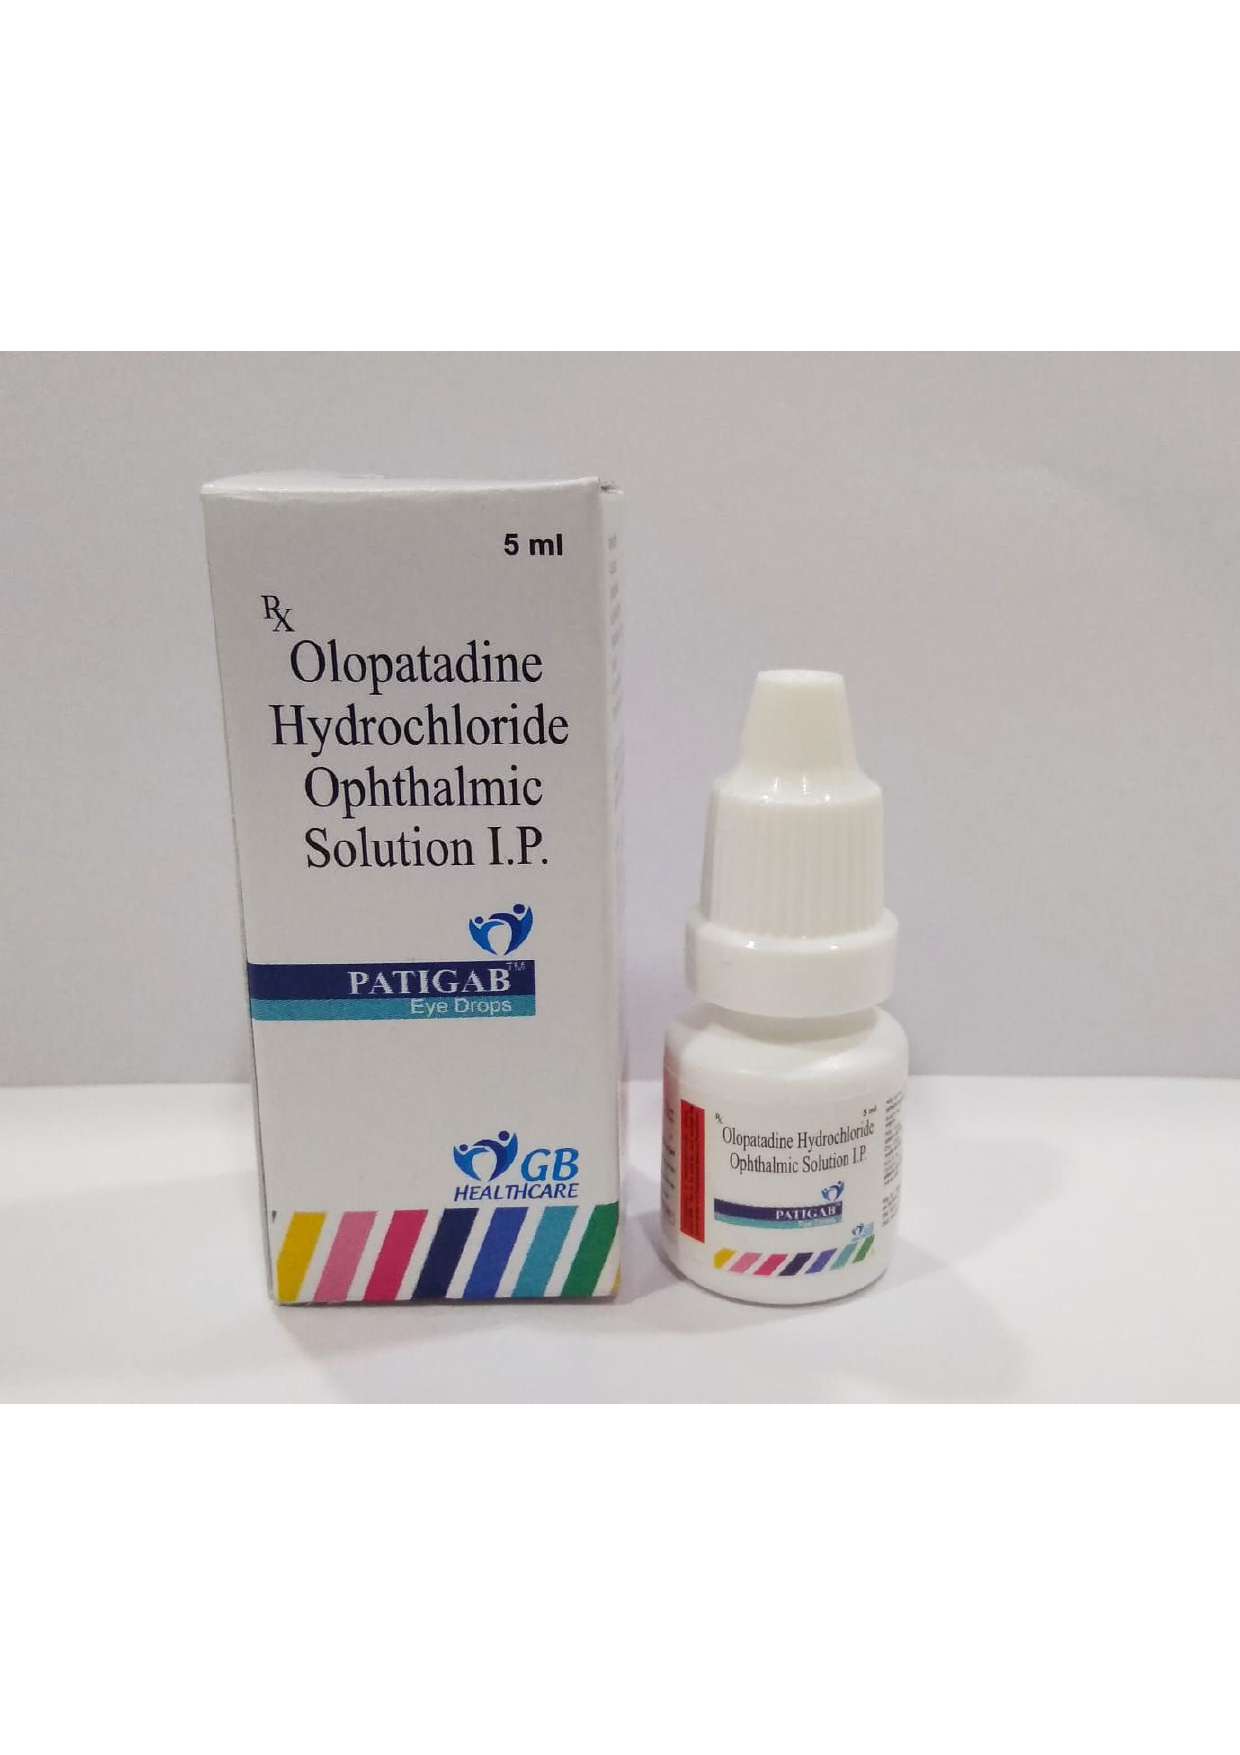 olopatadine hydrochloride ophthalmic solutions i.p